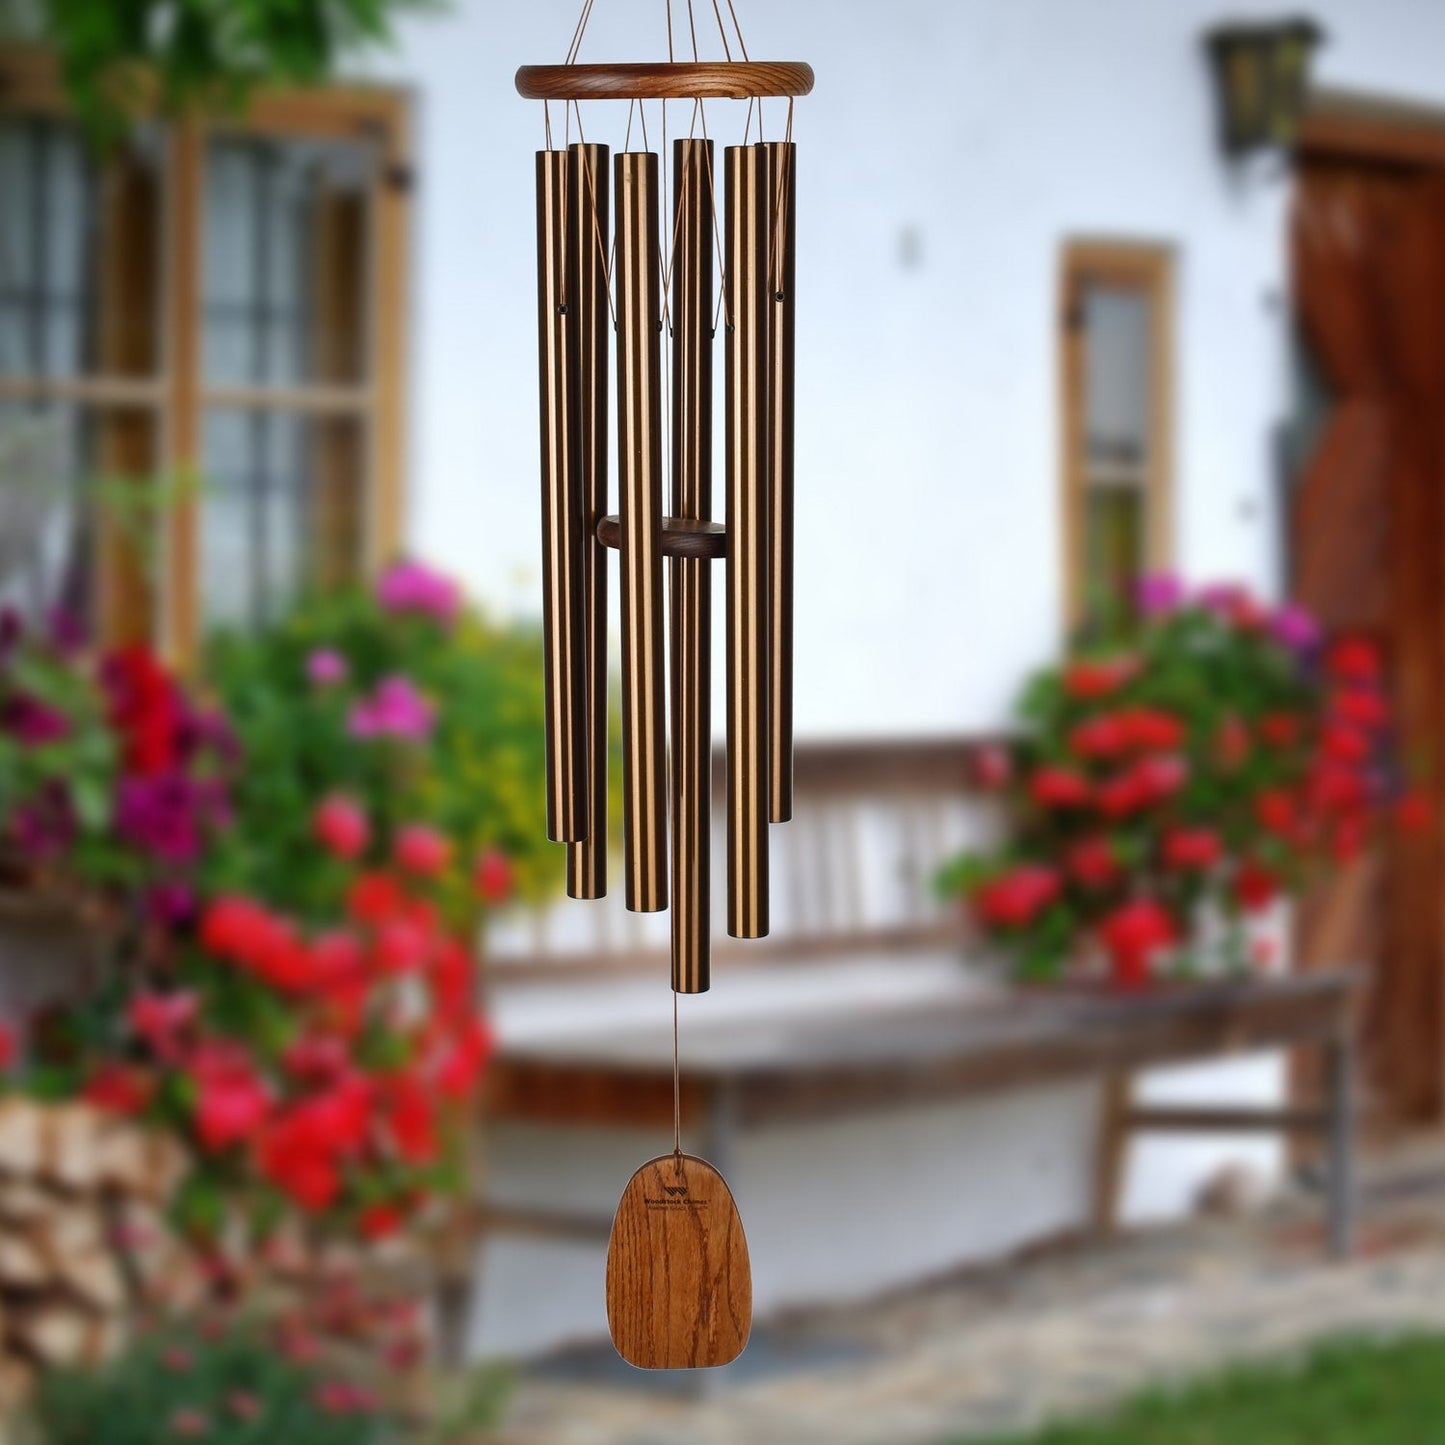 Amazing Grace® Chime - Large, Bronze - by Woodstock Chimes